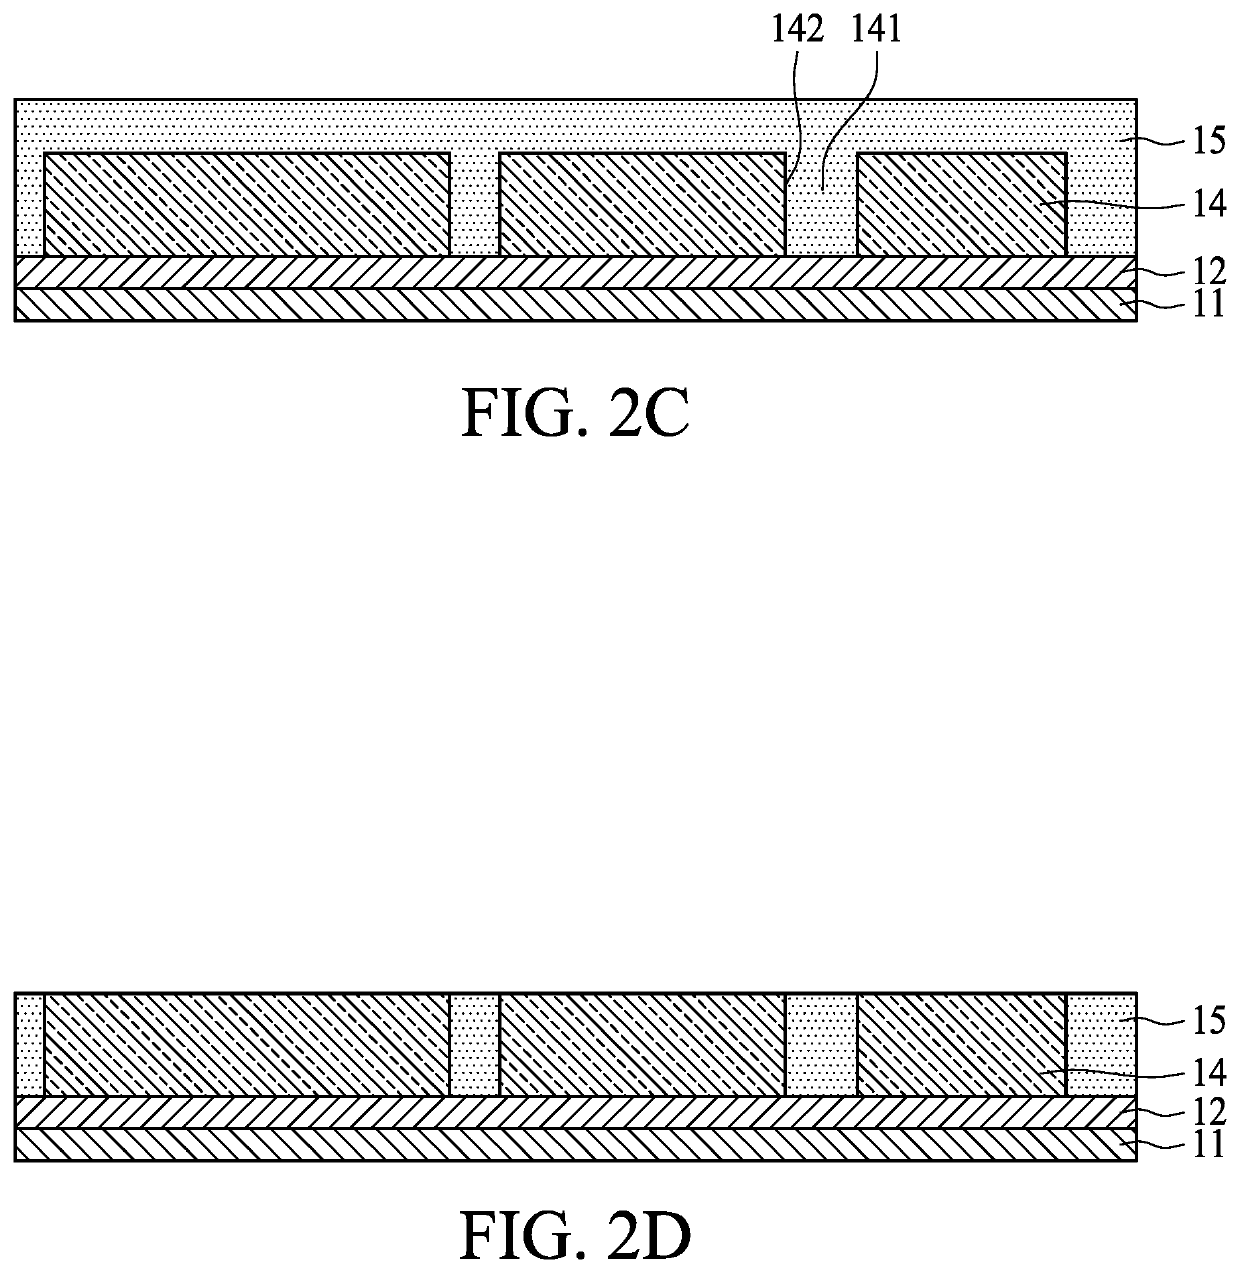 Insulated metal substrate and method for manufacturing same